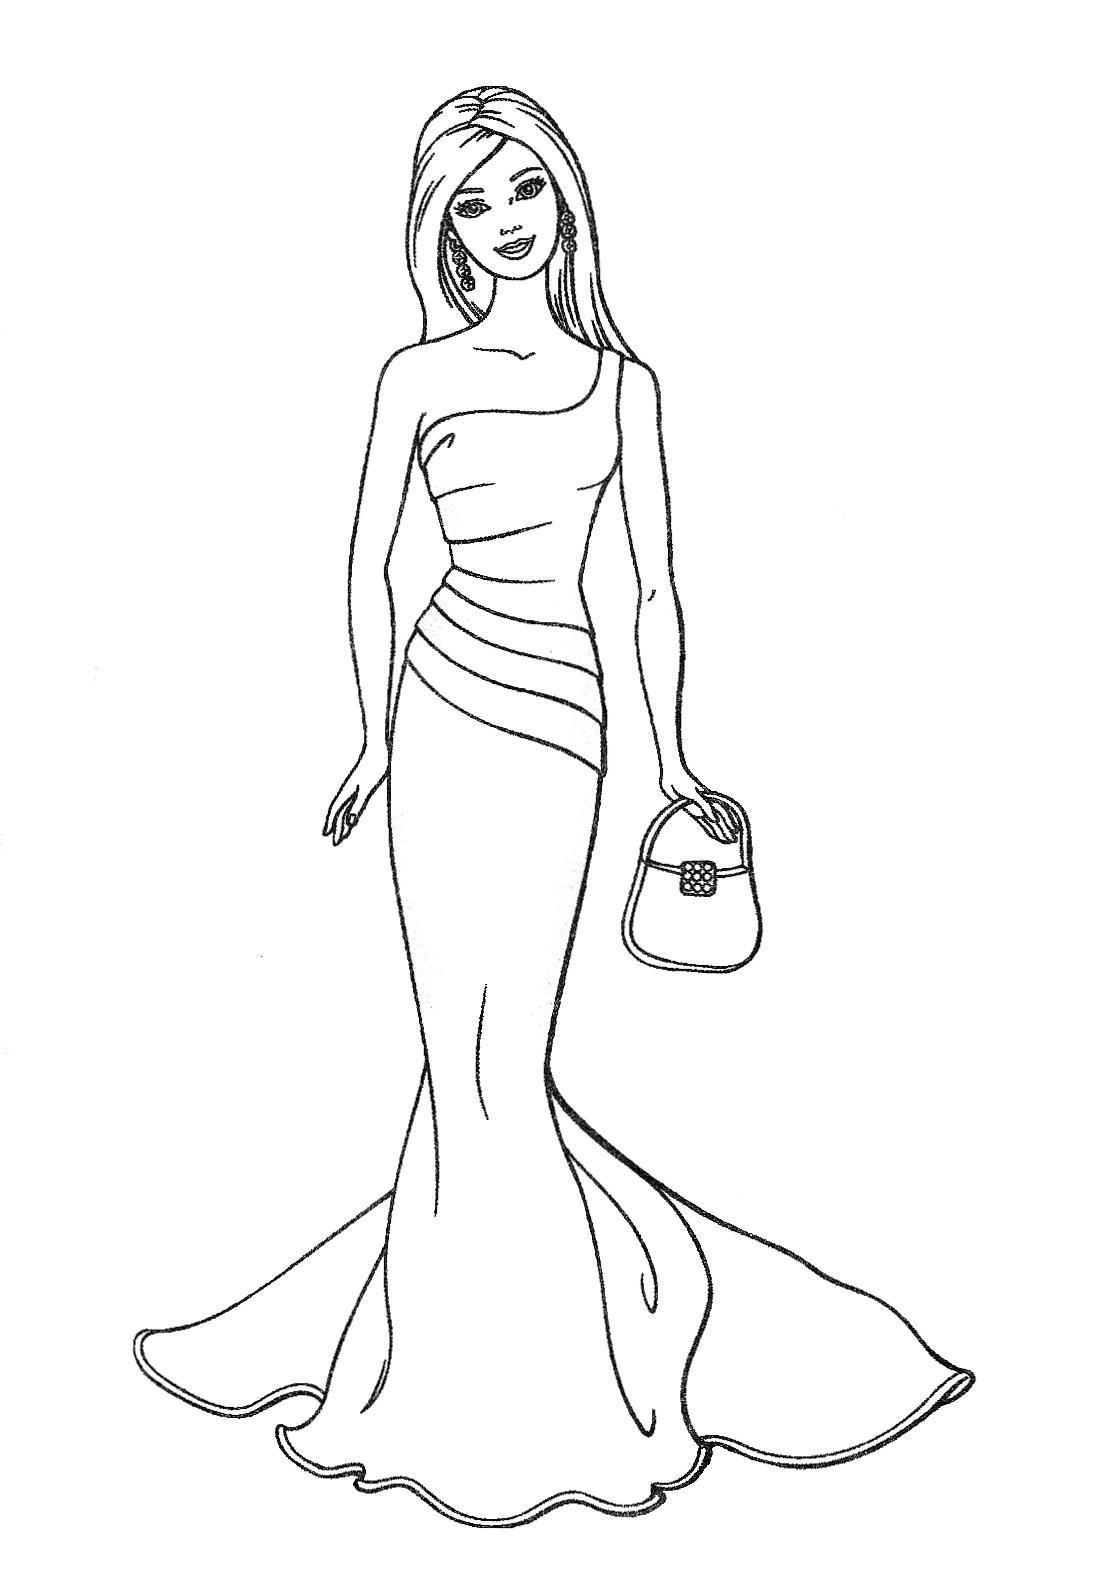 Drawing Barbie #27464 (Cartoons) – Printable coloring pages